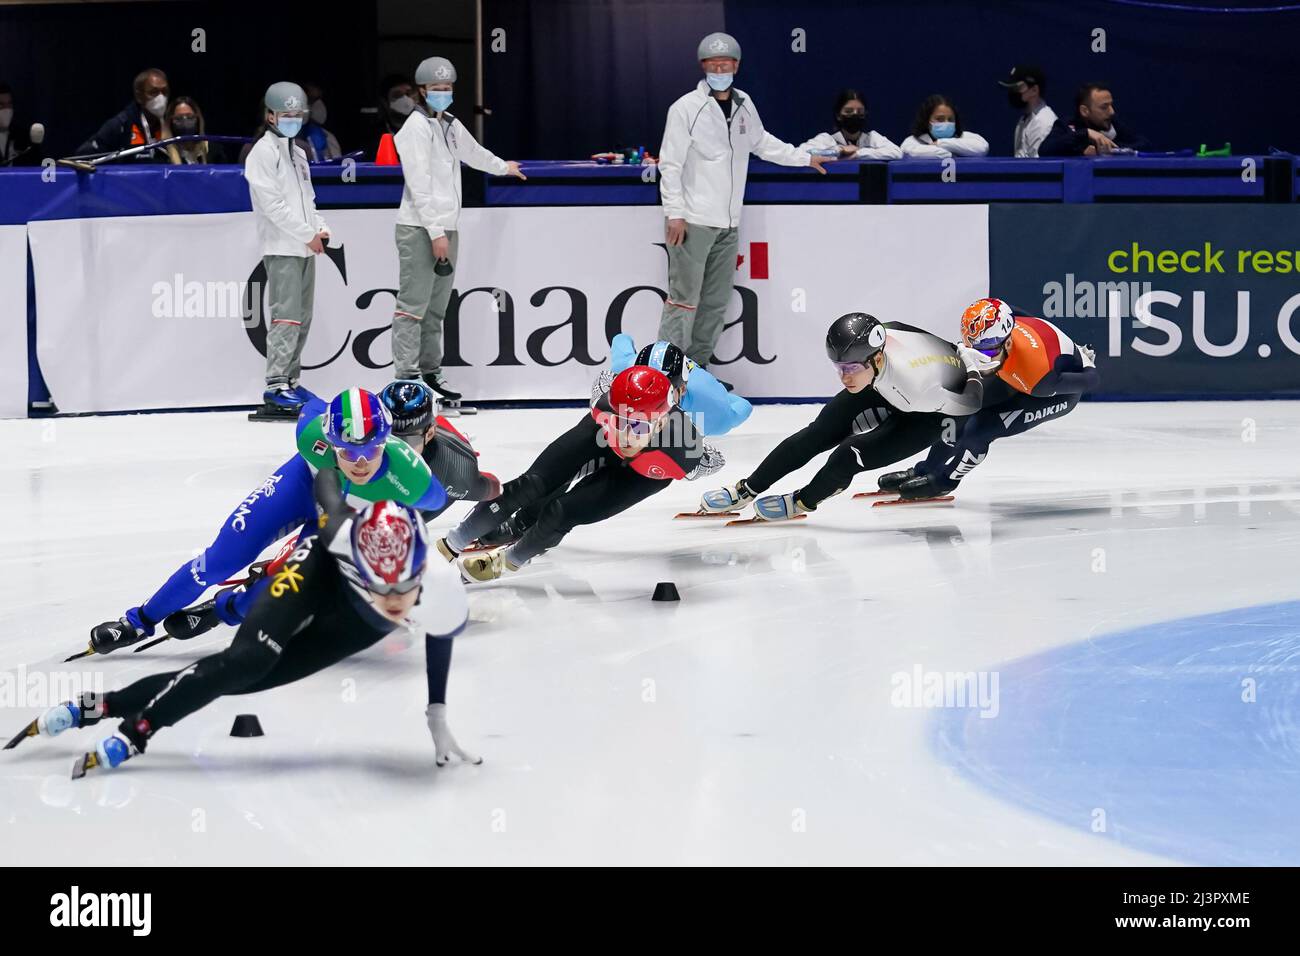 MONTREAL, CANADA - APRIL 9: June Seo Lee of the Republic of Korea, Luca Spechenhauser of Italy, Pascal Dion of Canada, Furkan Akar of Turkey, Stijn Desmet of Belgium, Shaoang Liu of of Hungary and Sjinkie Knegt of the Netherlands competing in the mens 1500m final A during Day 2 of the ISU World Short Track Championships at the Maurice Richard Arena on April 9, 2022 in Montreal, Canada (Photo by Andre Weening/Orange Pictures) Stock Photo